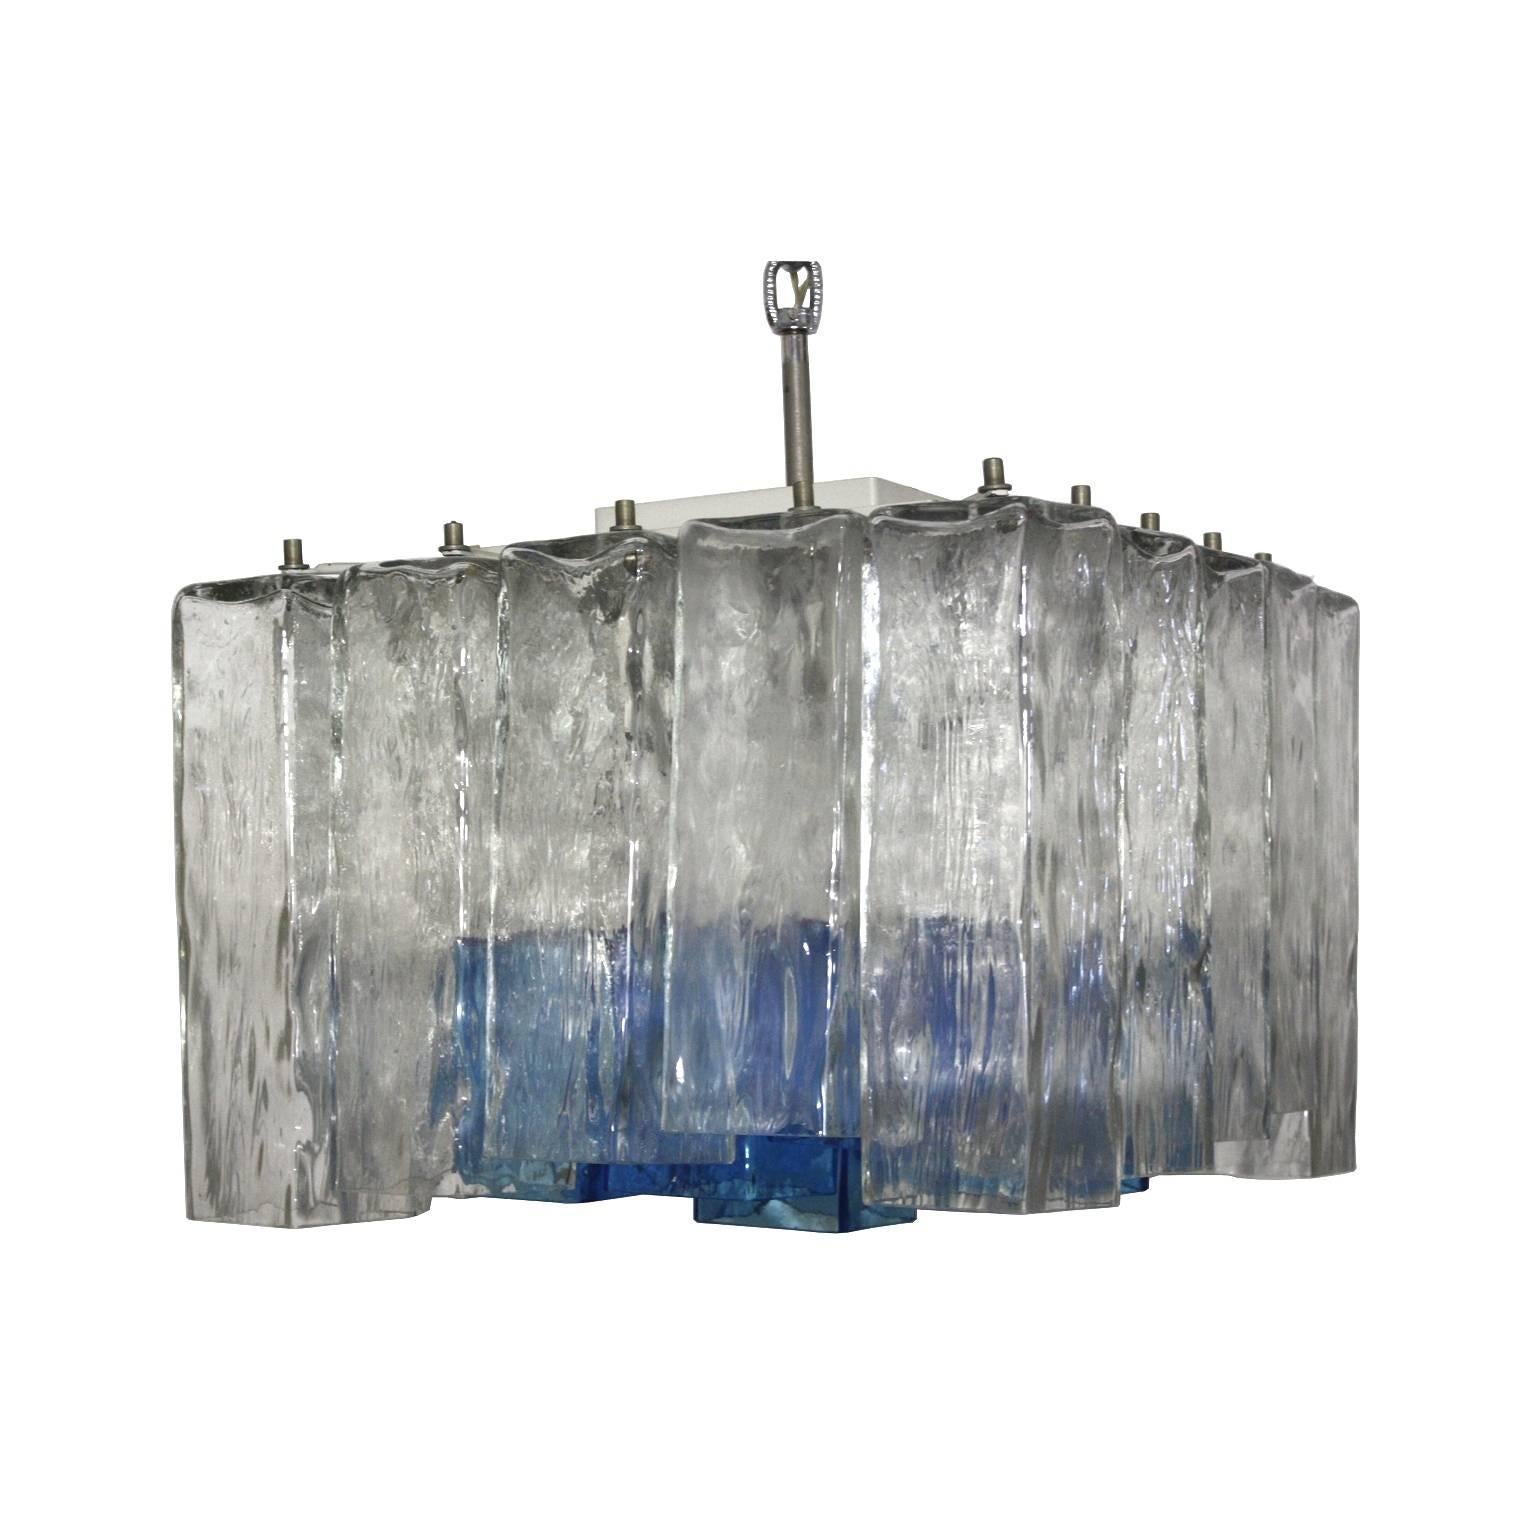 Barovier e Toso, blown glass chandelier with transparent and blue elements, circa 1970.